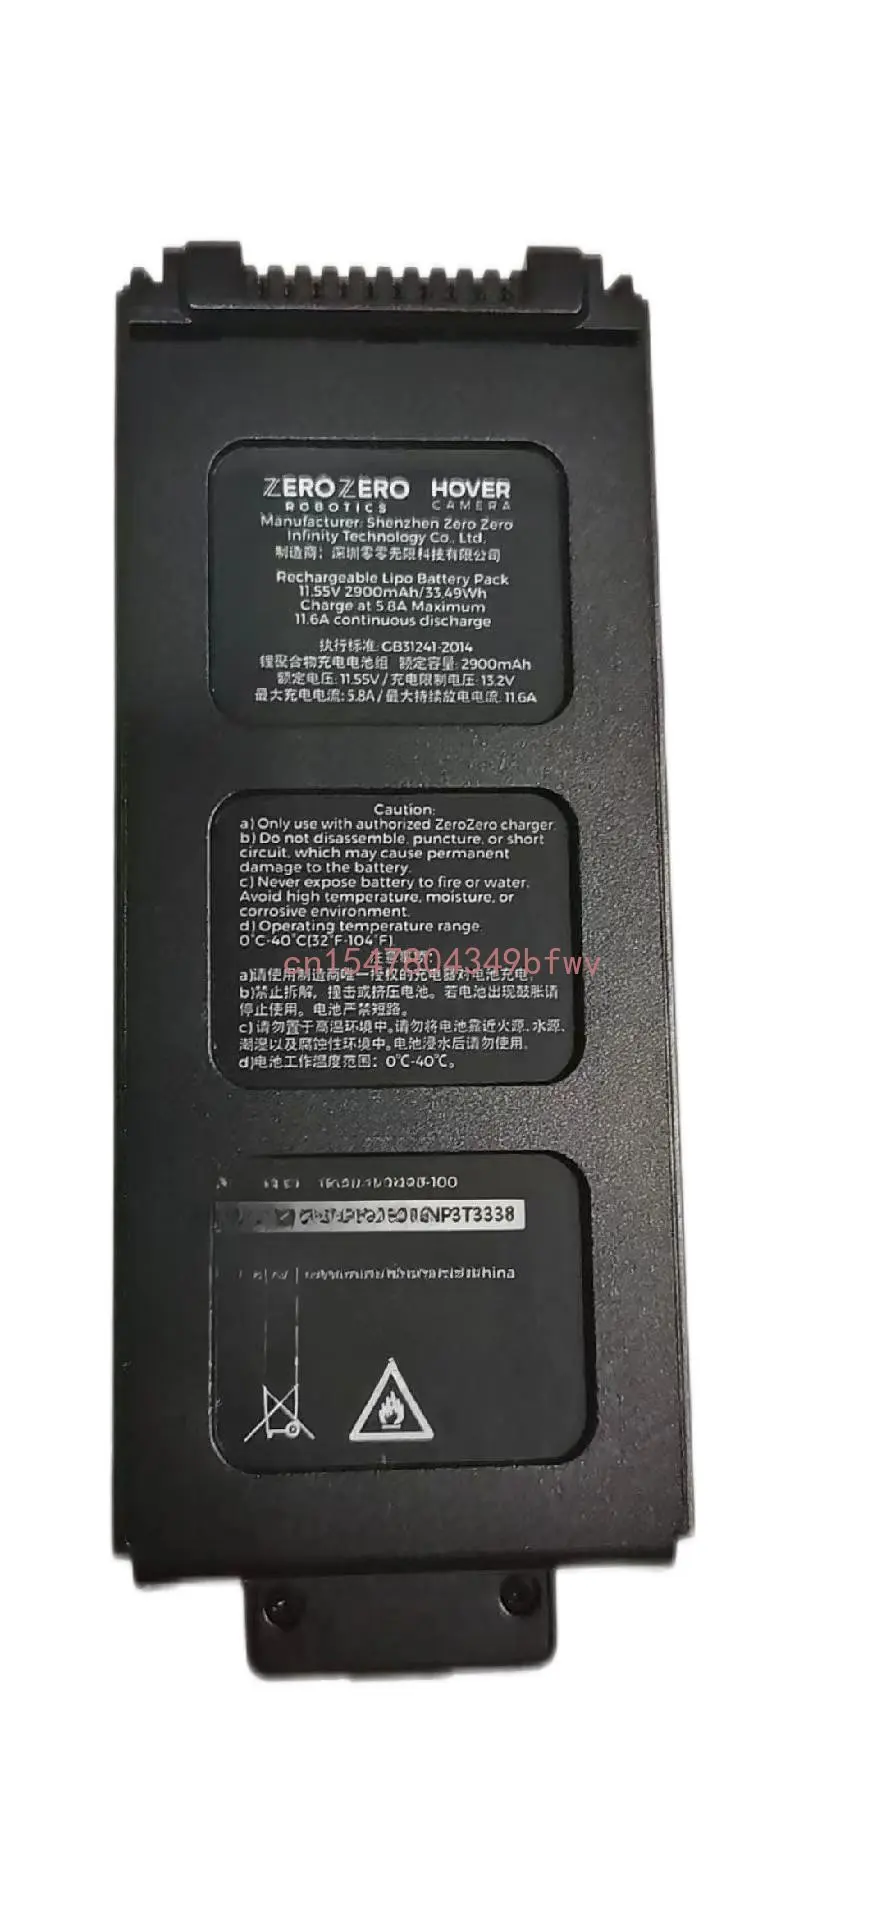 

For New Hover2 Generation Little Black Man 2 Zero Unmanned Intelligent Machine Battery Zb-100 2900 MA